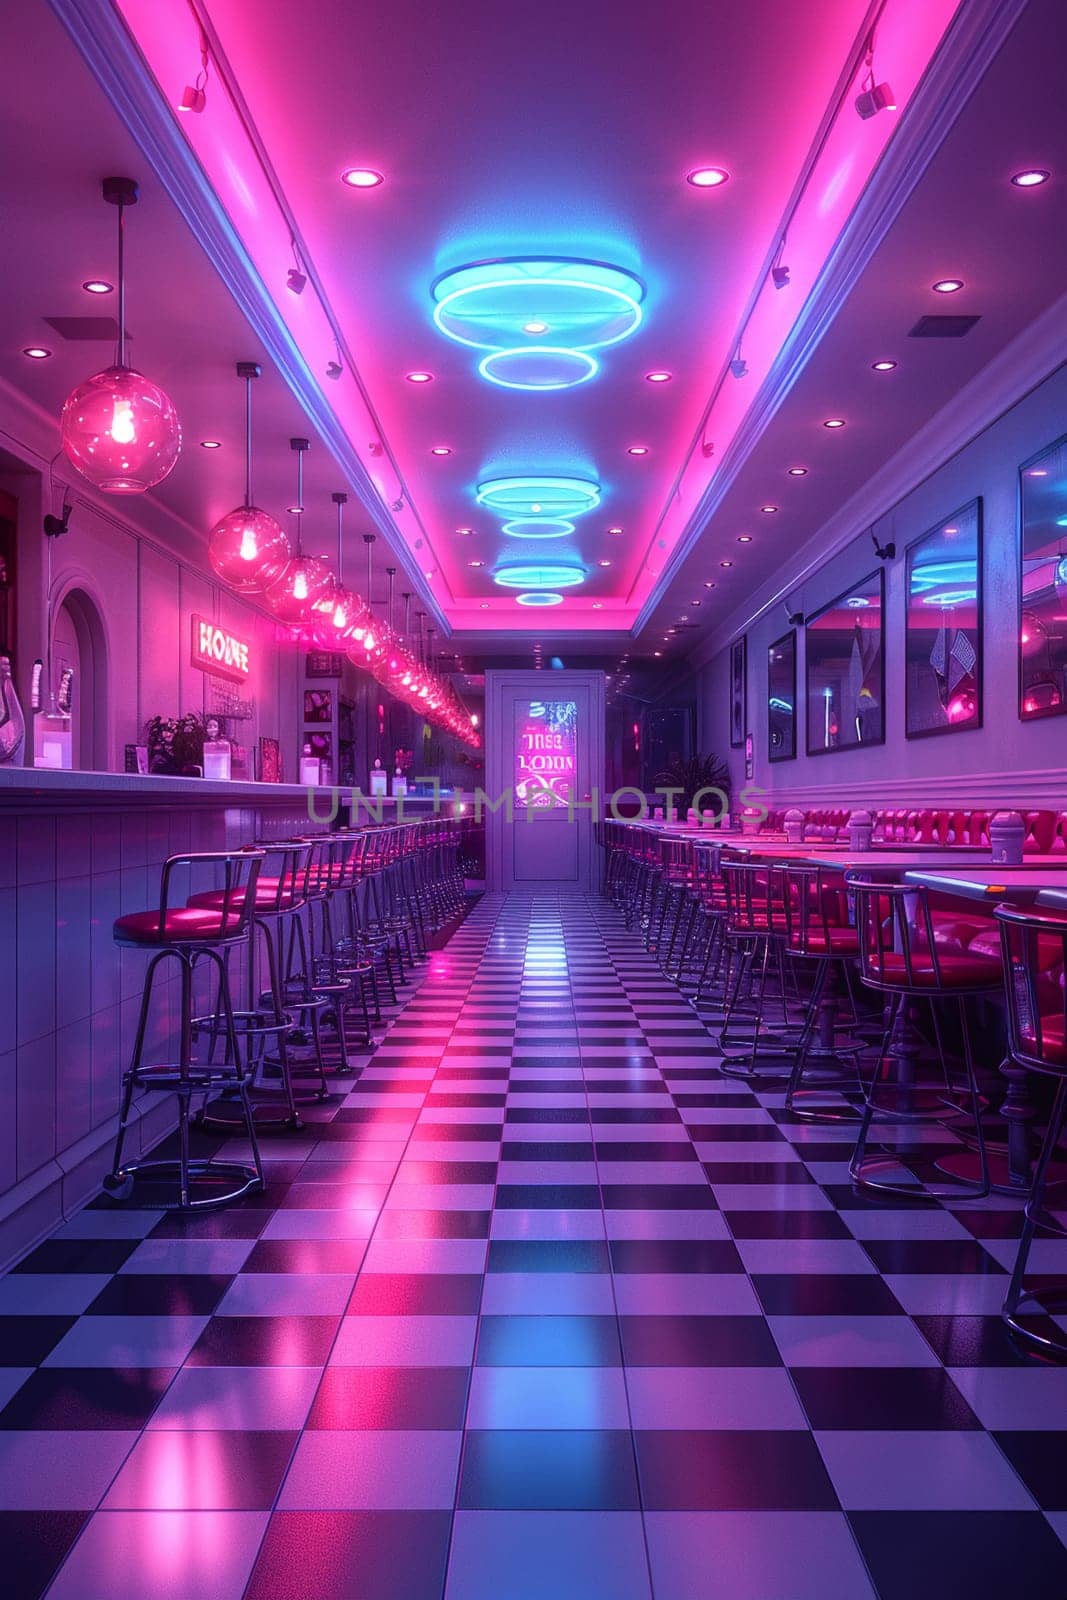 Retro-futuristic diner with chrome accents and neon lighting.3D render.